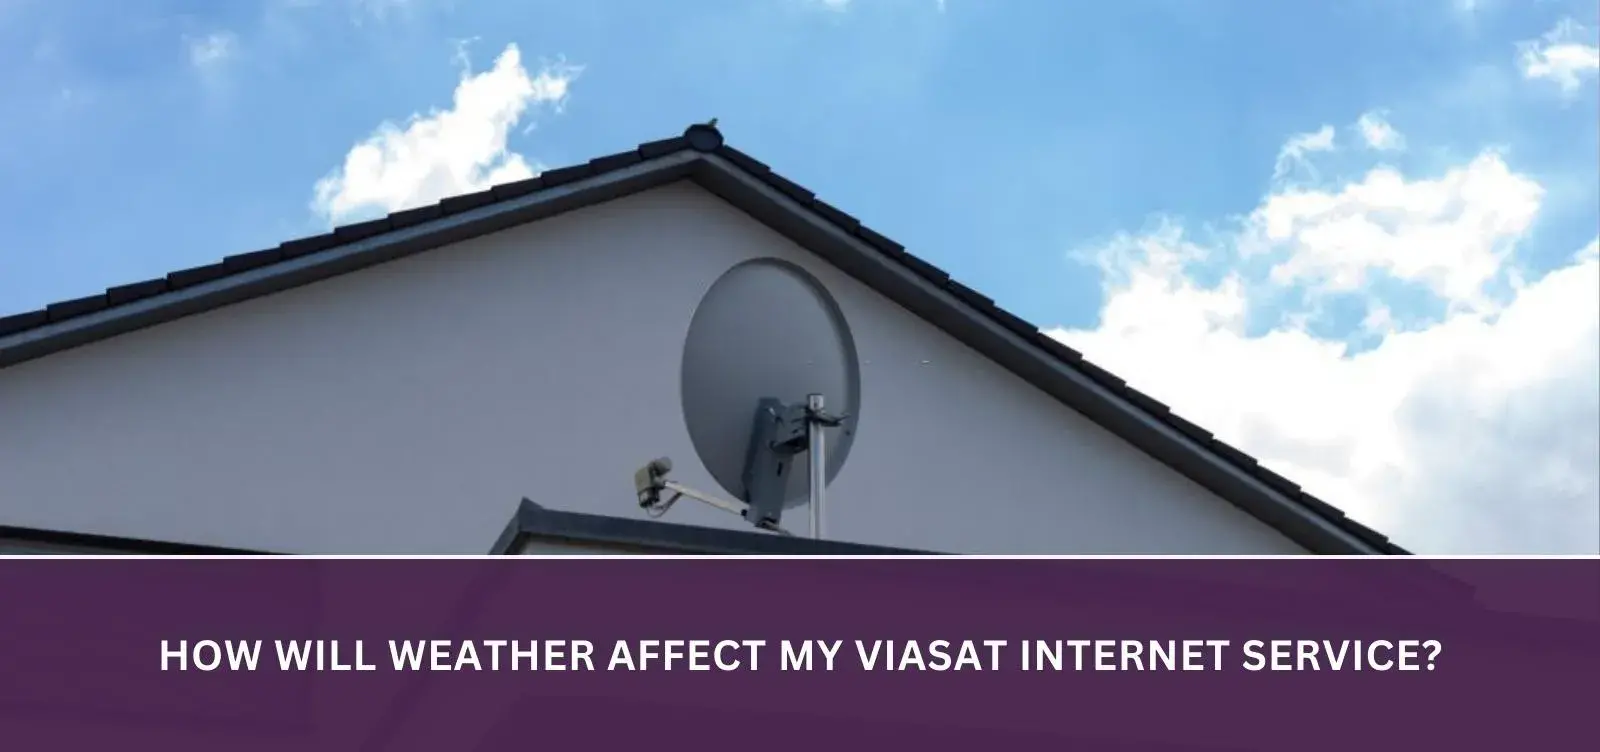 How will weather affect my Viasat Internet service?